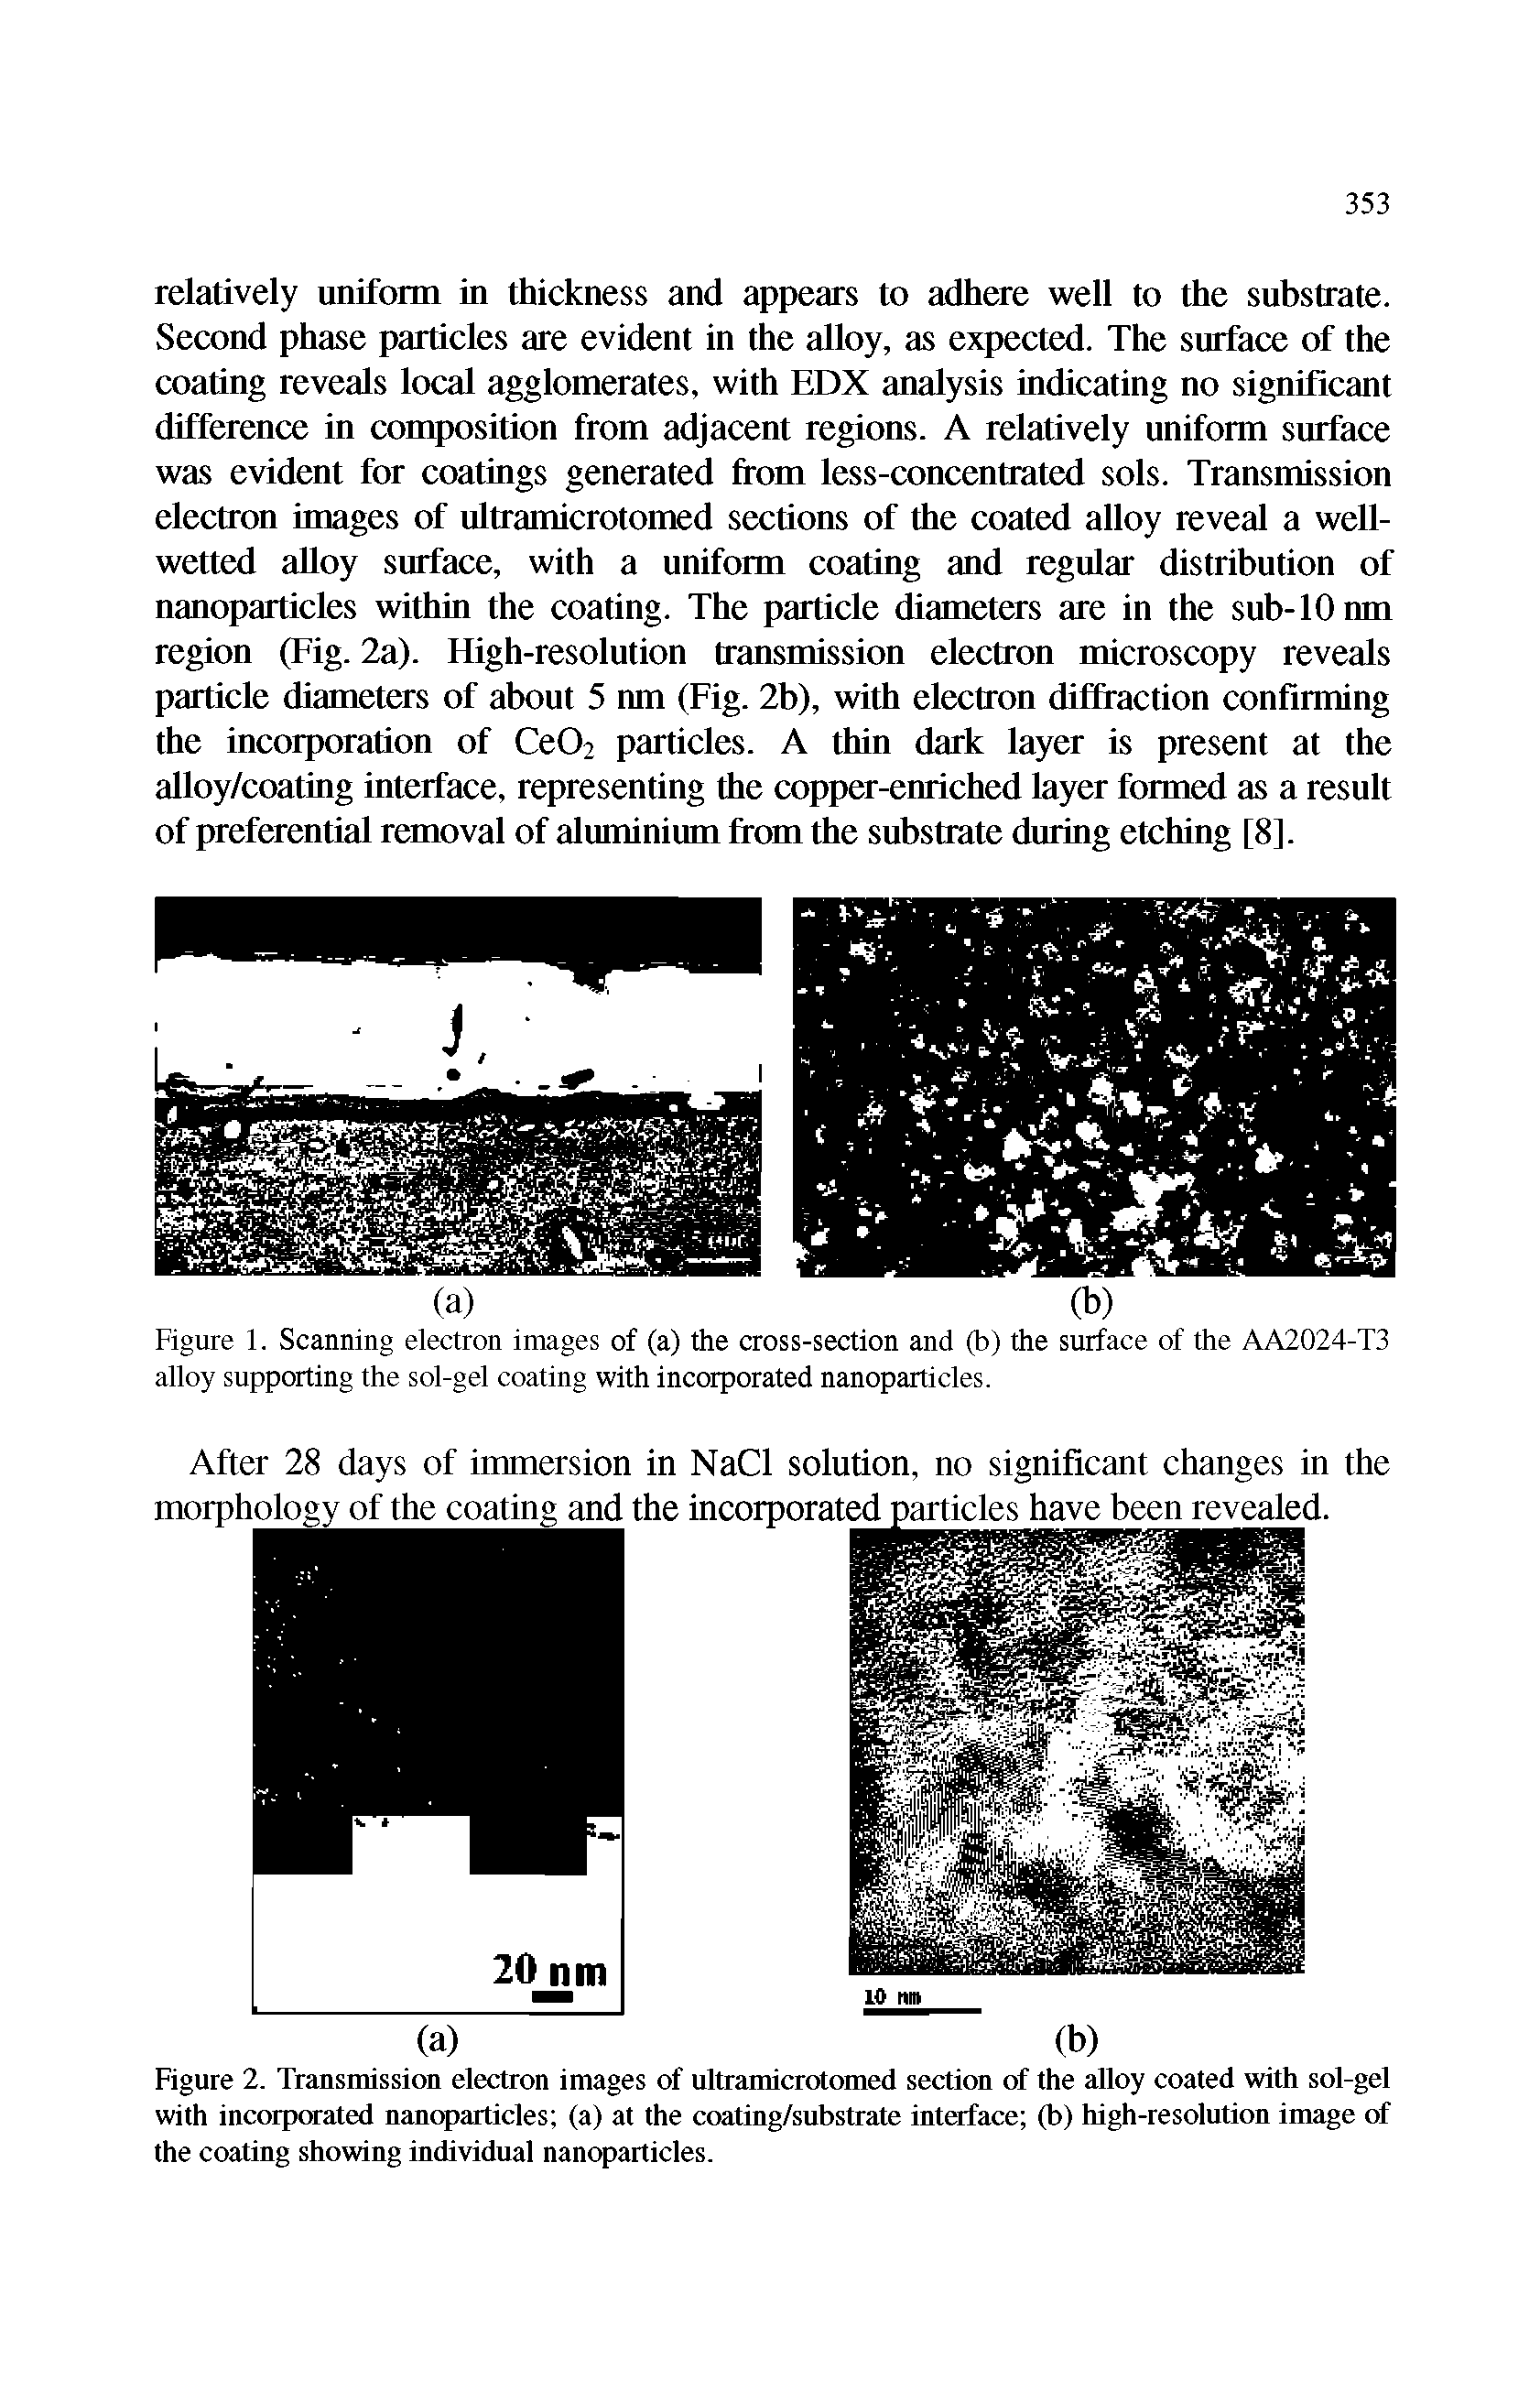 Figure 2. Transmission electron images of ultramicrotomed section of the alloy coated with sol-gel with incorporated nanoparticles (a) at the coating/substrate interface (b) high-resolution image of the coating showing individual nanoparticles.